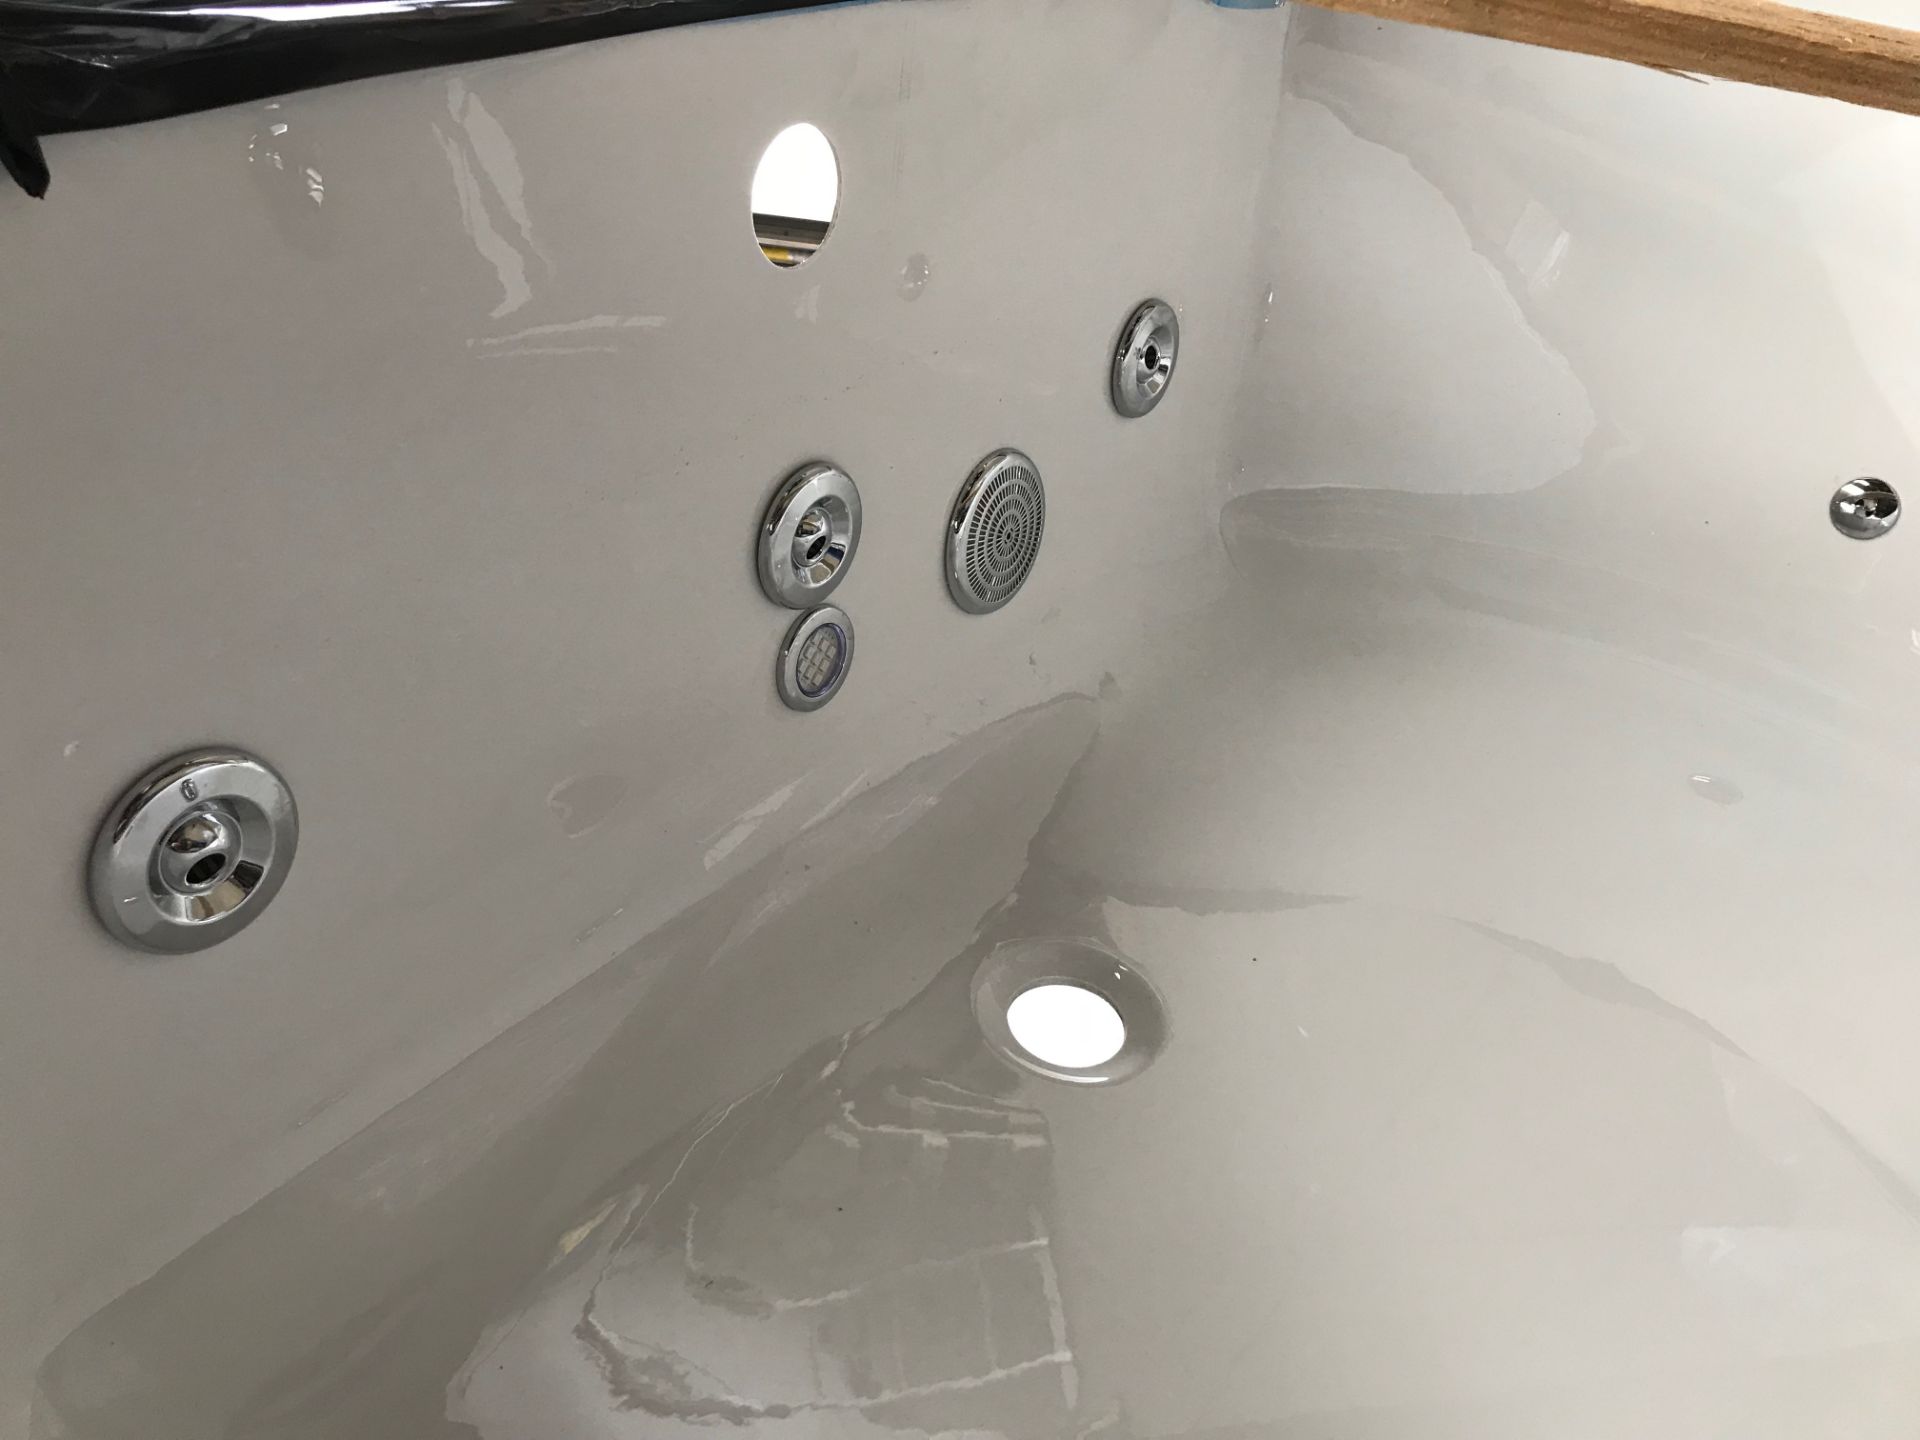 Whirlpool Corner Bath Includes Headrests, Pump and fitments, feet and fittings. - Image 7 of 10